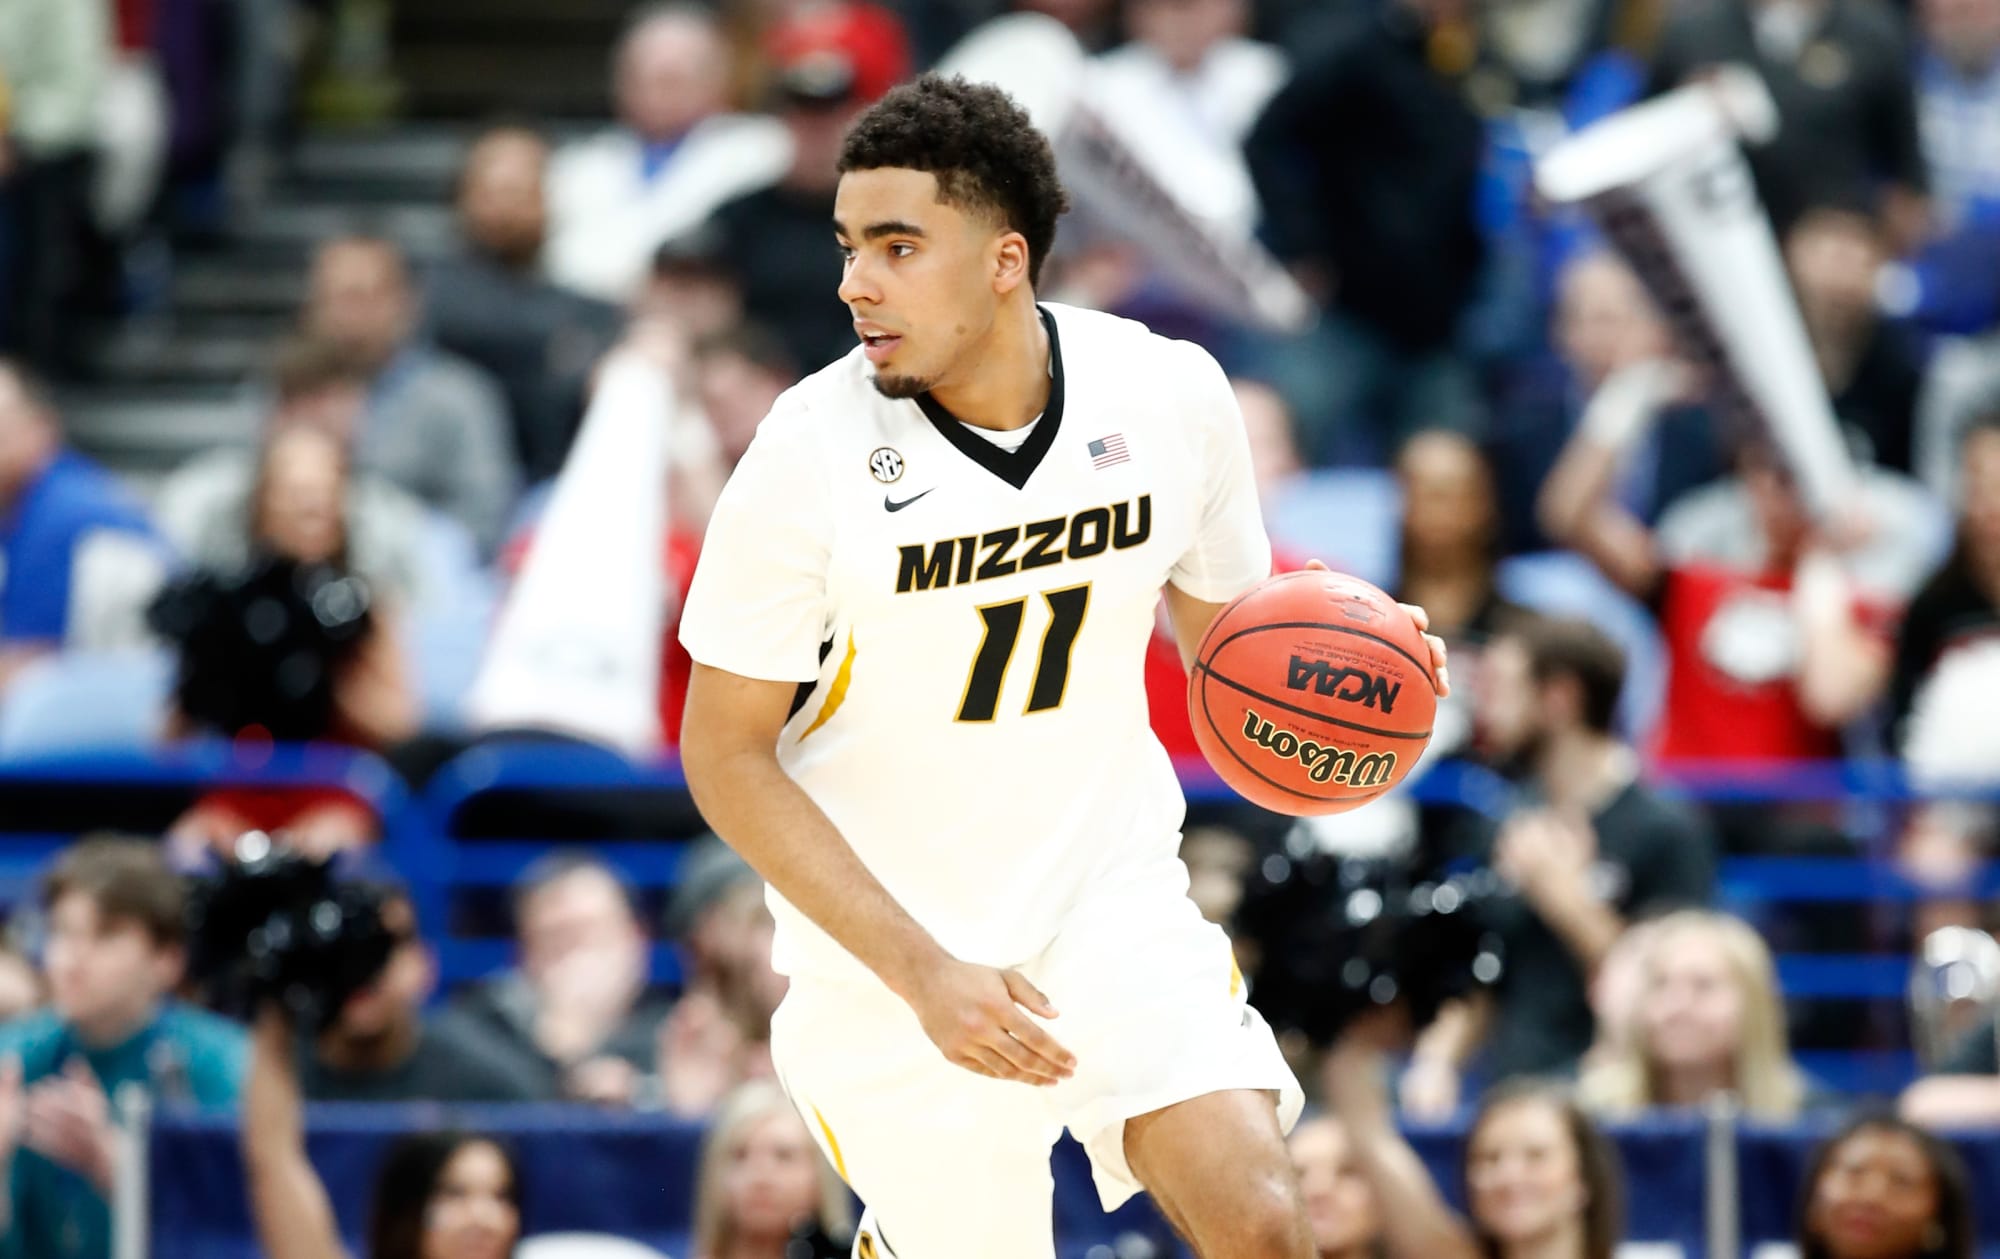 Missouri Basketball 201819 season preview for the Tigers